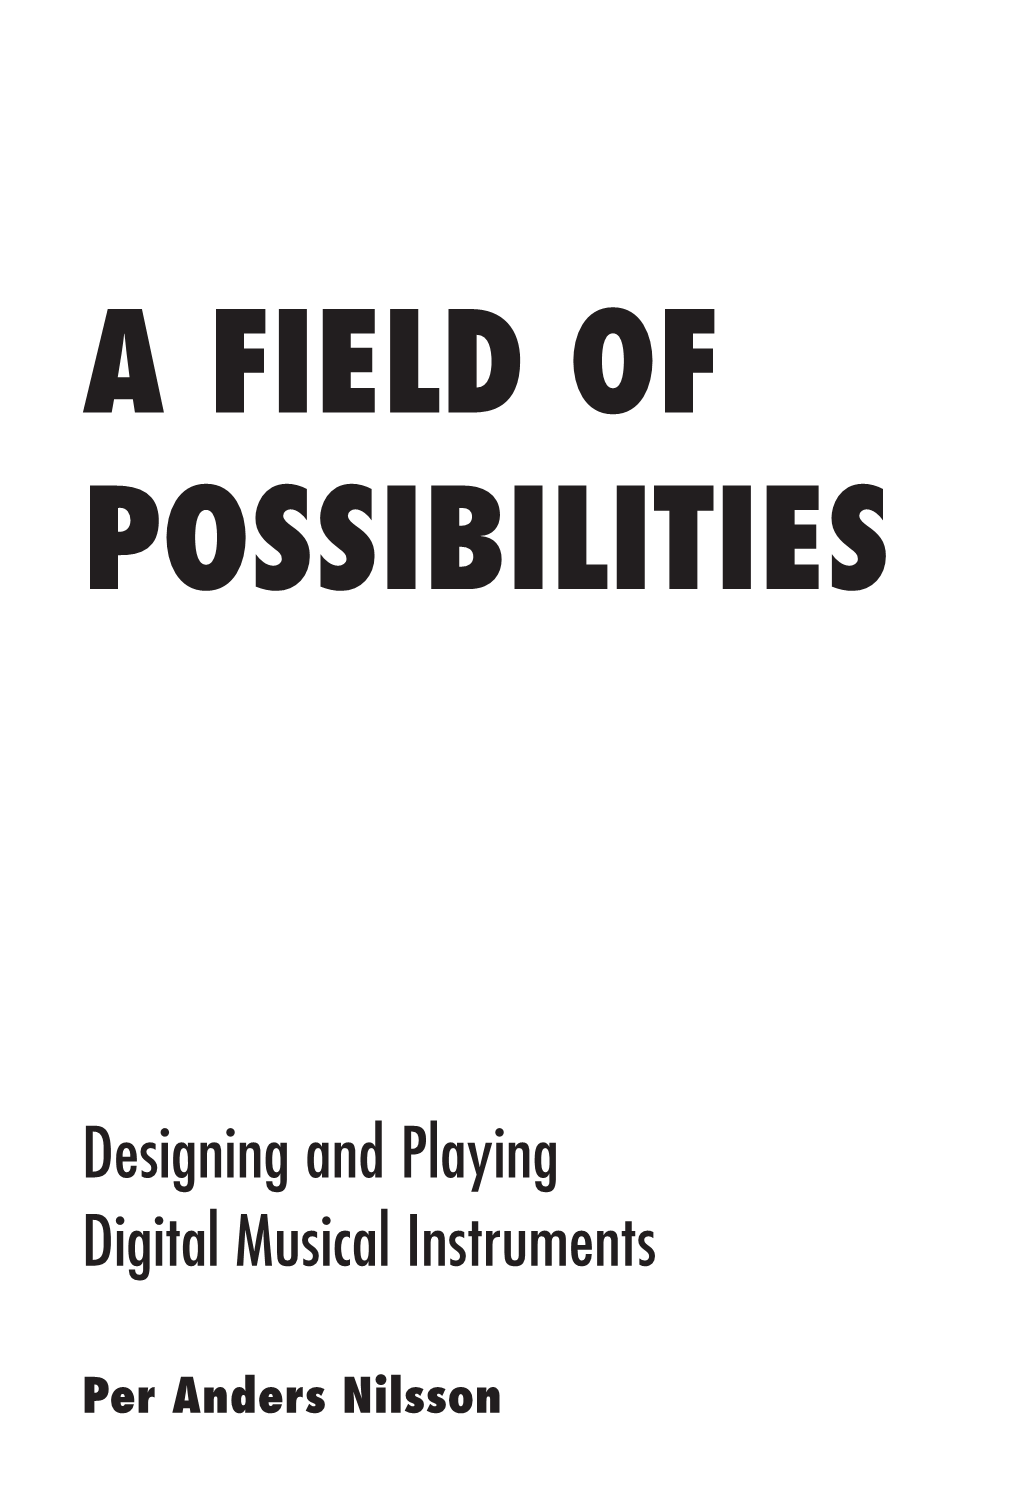 A Field of Possibilities